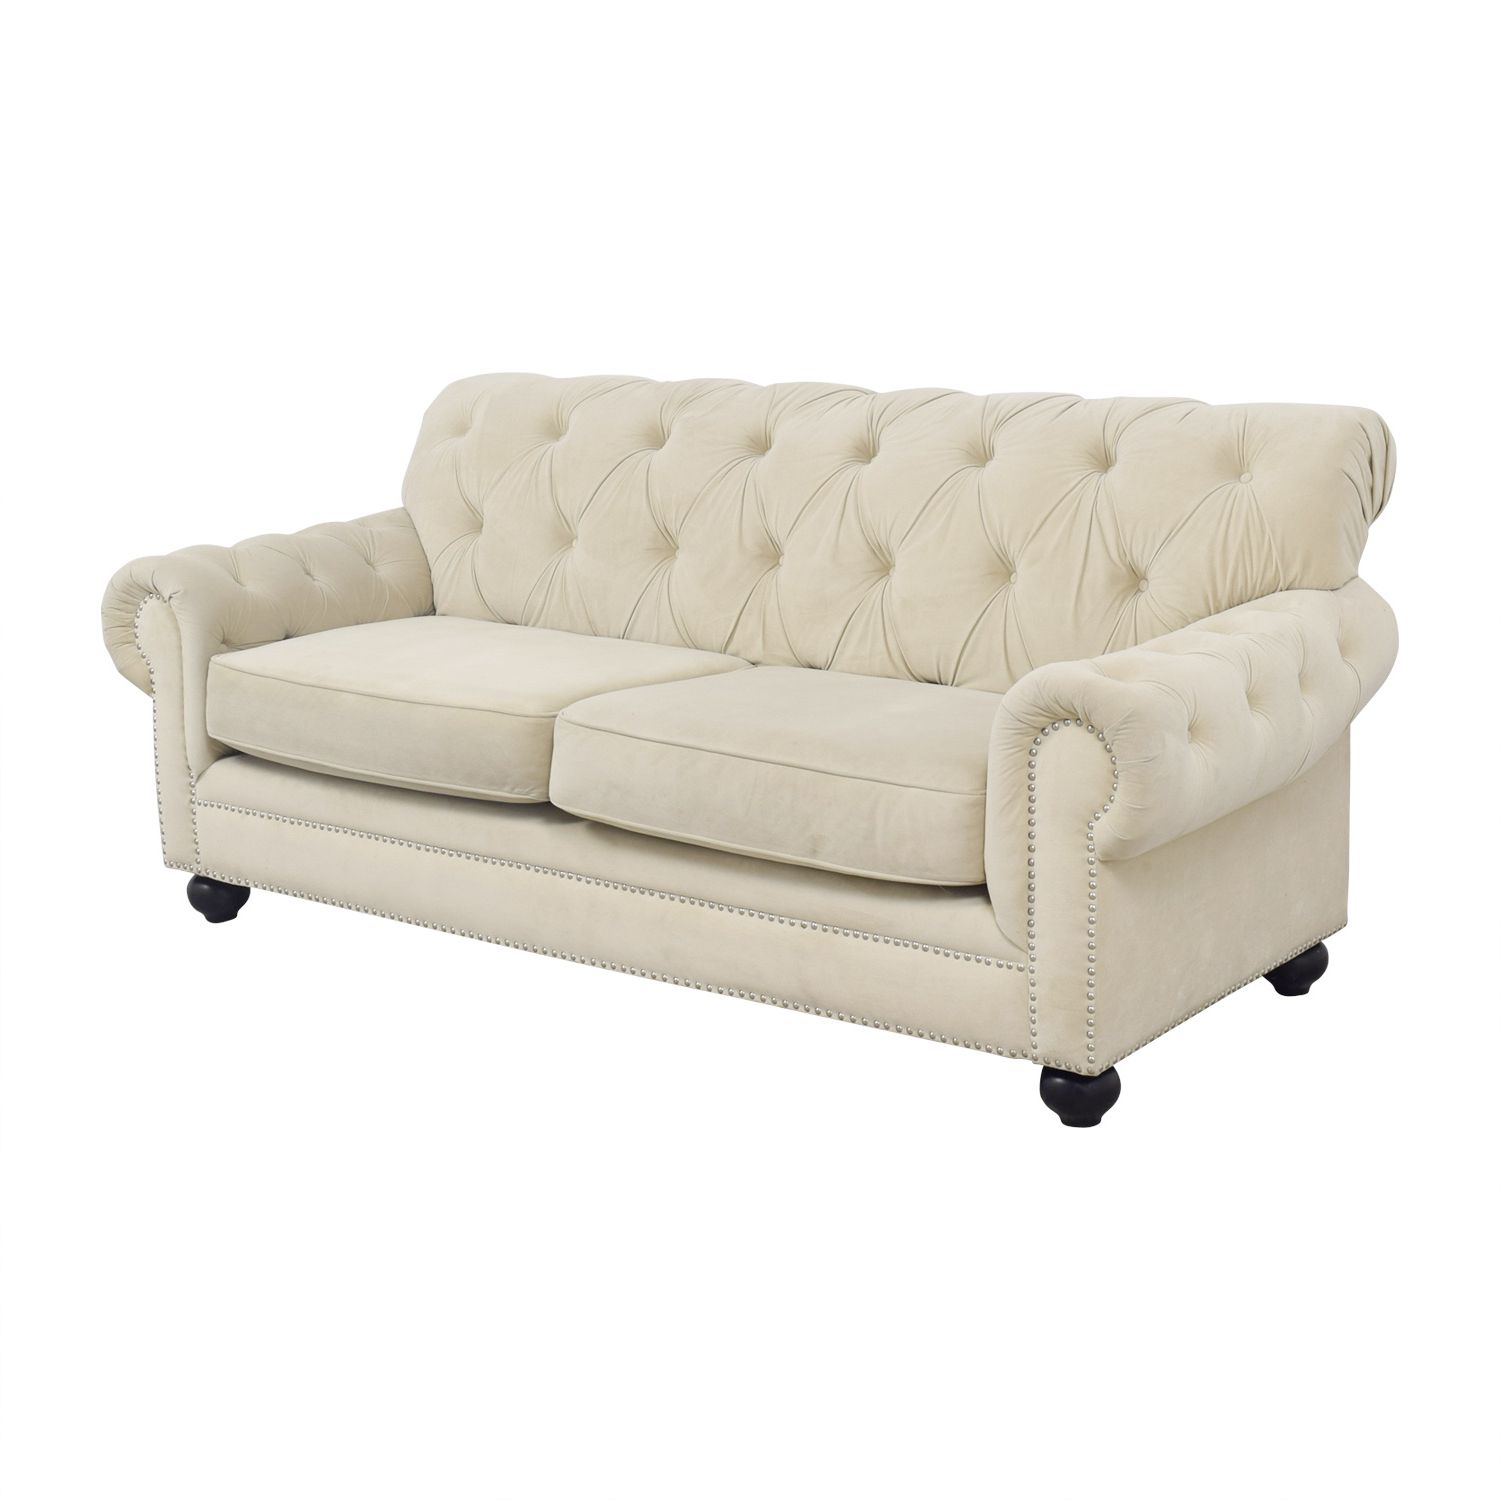 88% Off – Chesterfield Style Tufted Beige Velvet Sofa / Sofas With Regard To Elegant Beige Velvet Sofas (View 17 of 20)